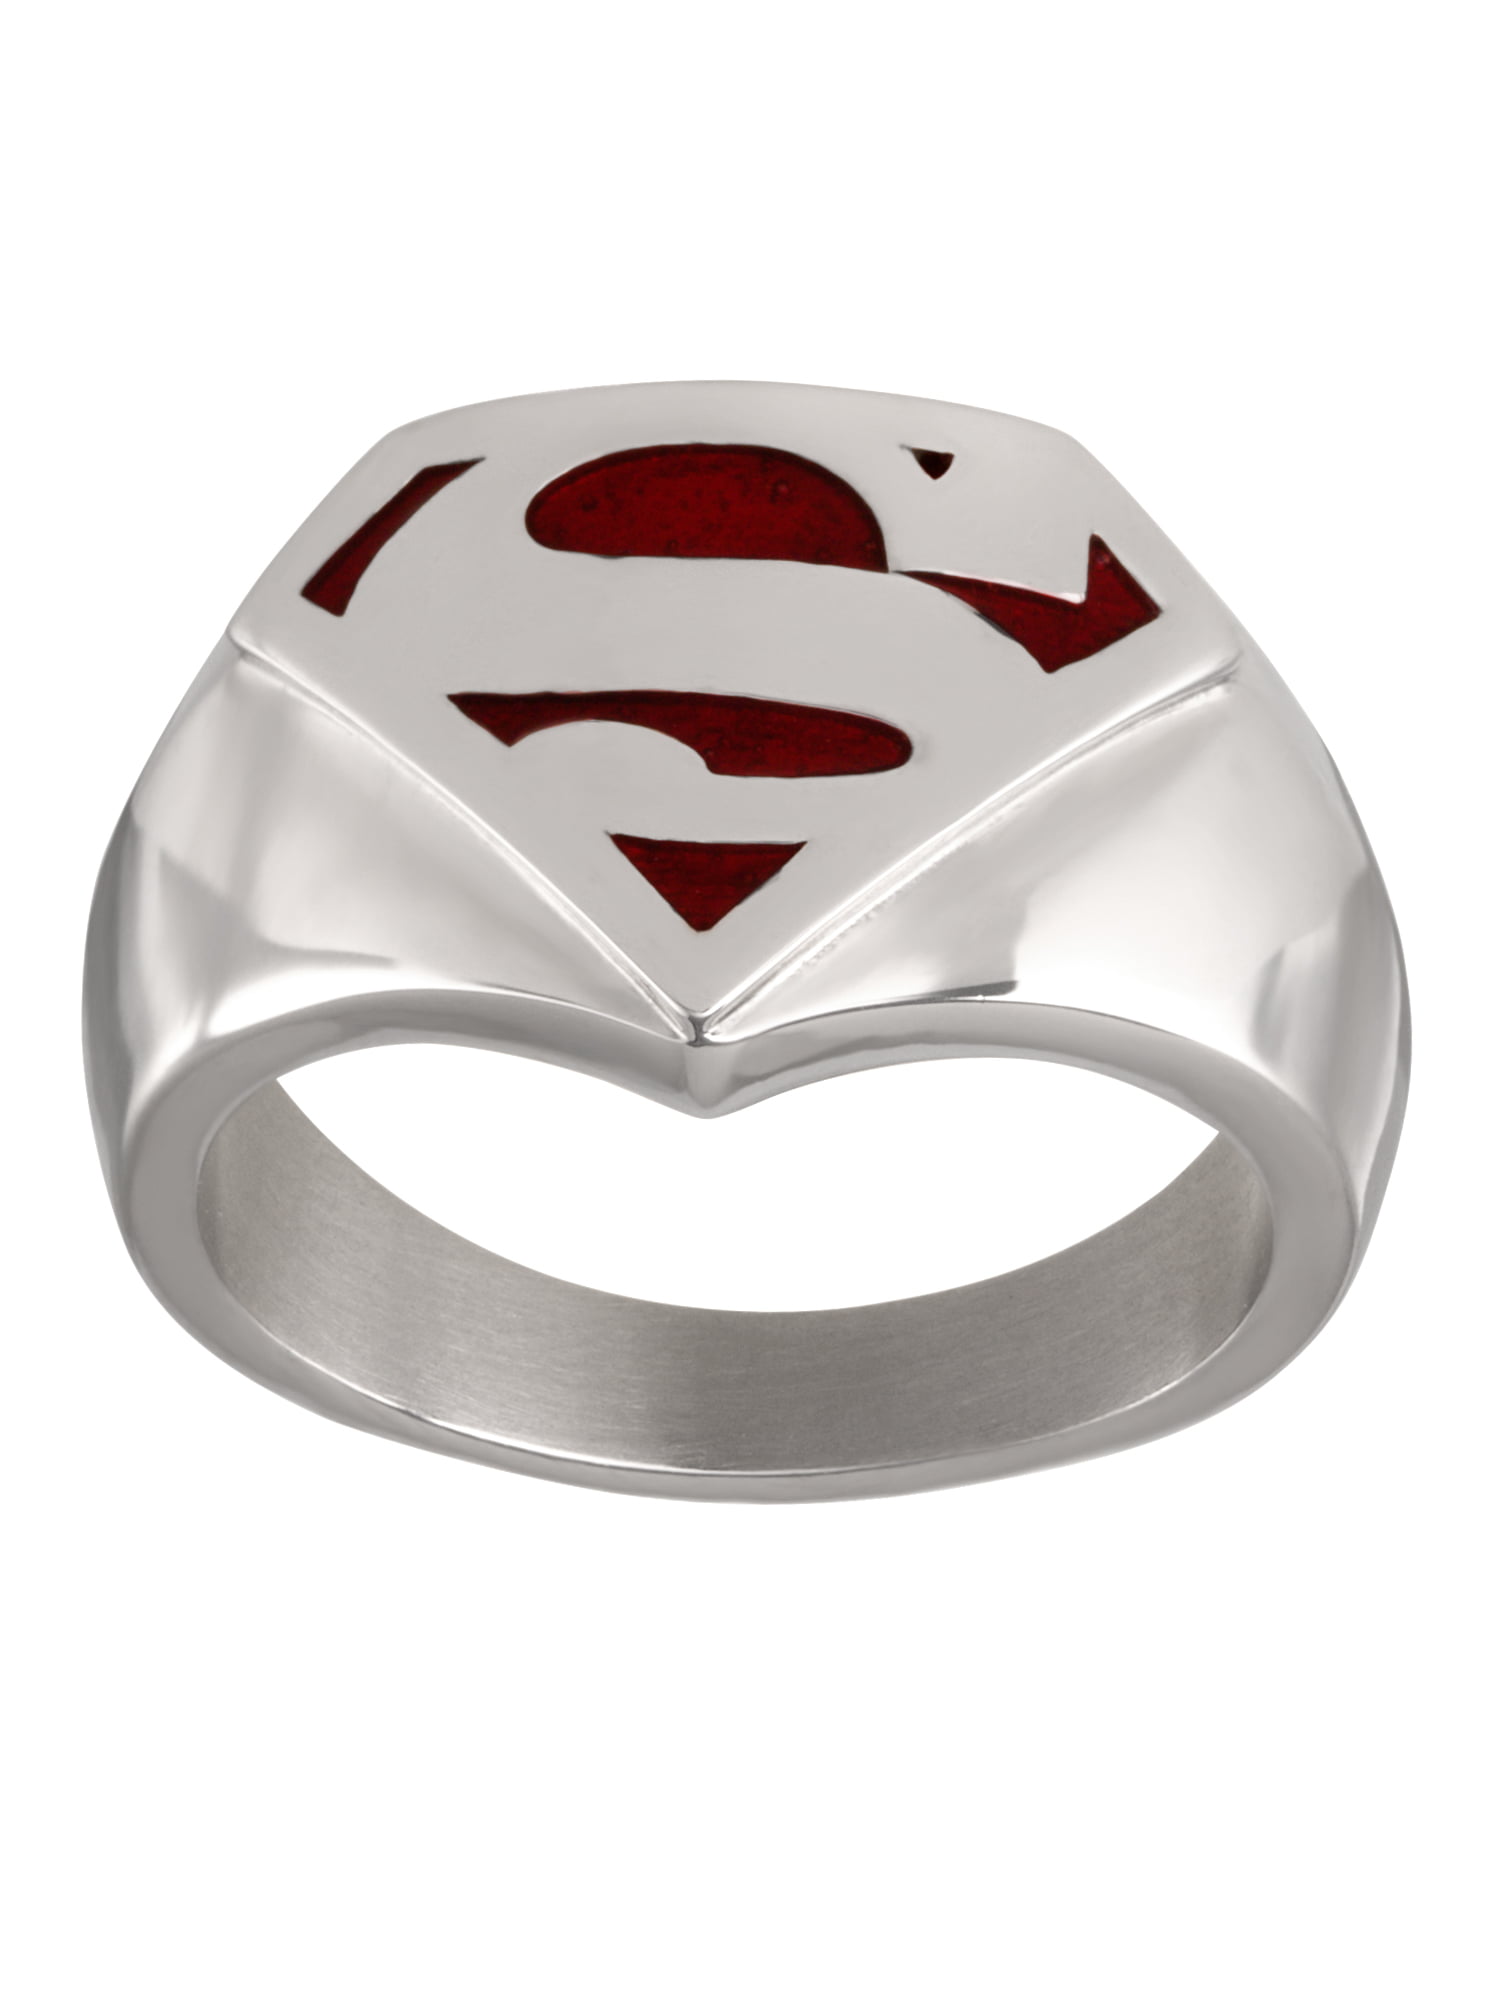 LOGO High Quality STAINLESS STEEL RING Size 10 Details about   CPGA Superman SHIELD 